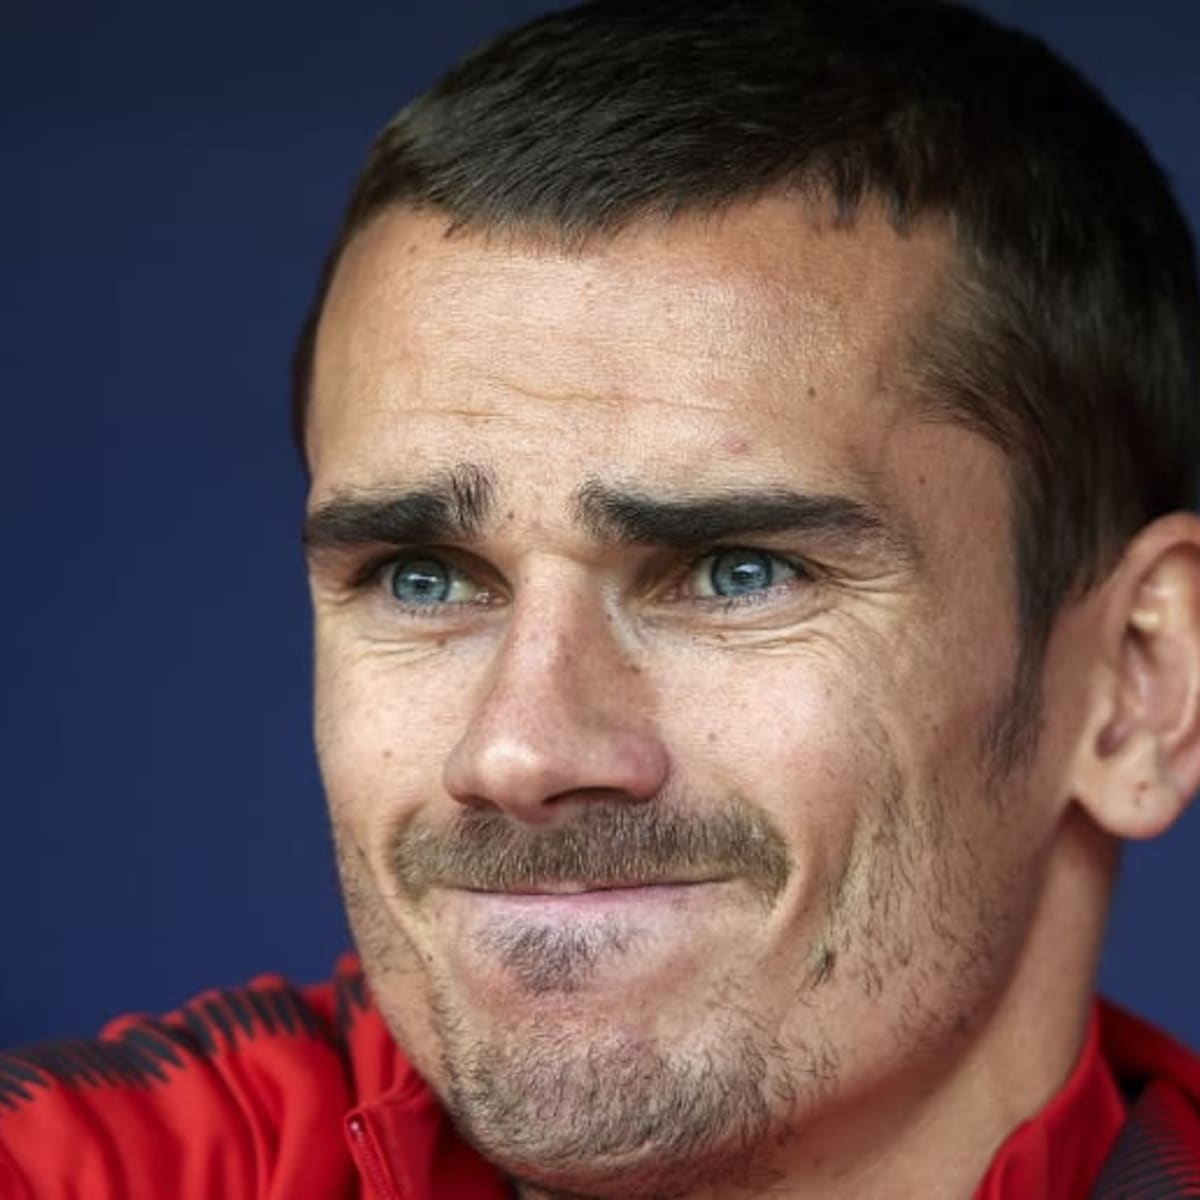 Griezmann poised to make history as Atlético take on Sevilla in LaLiga -  Into the Calderon